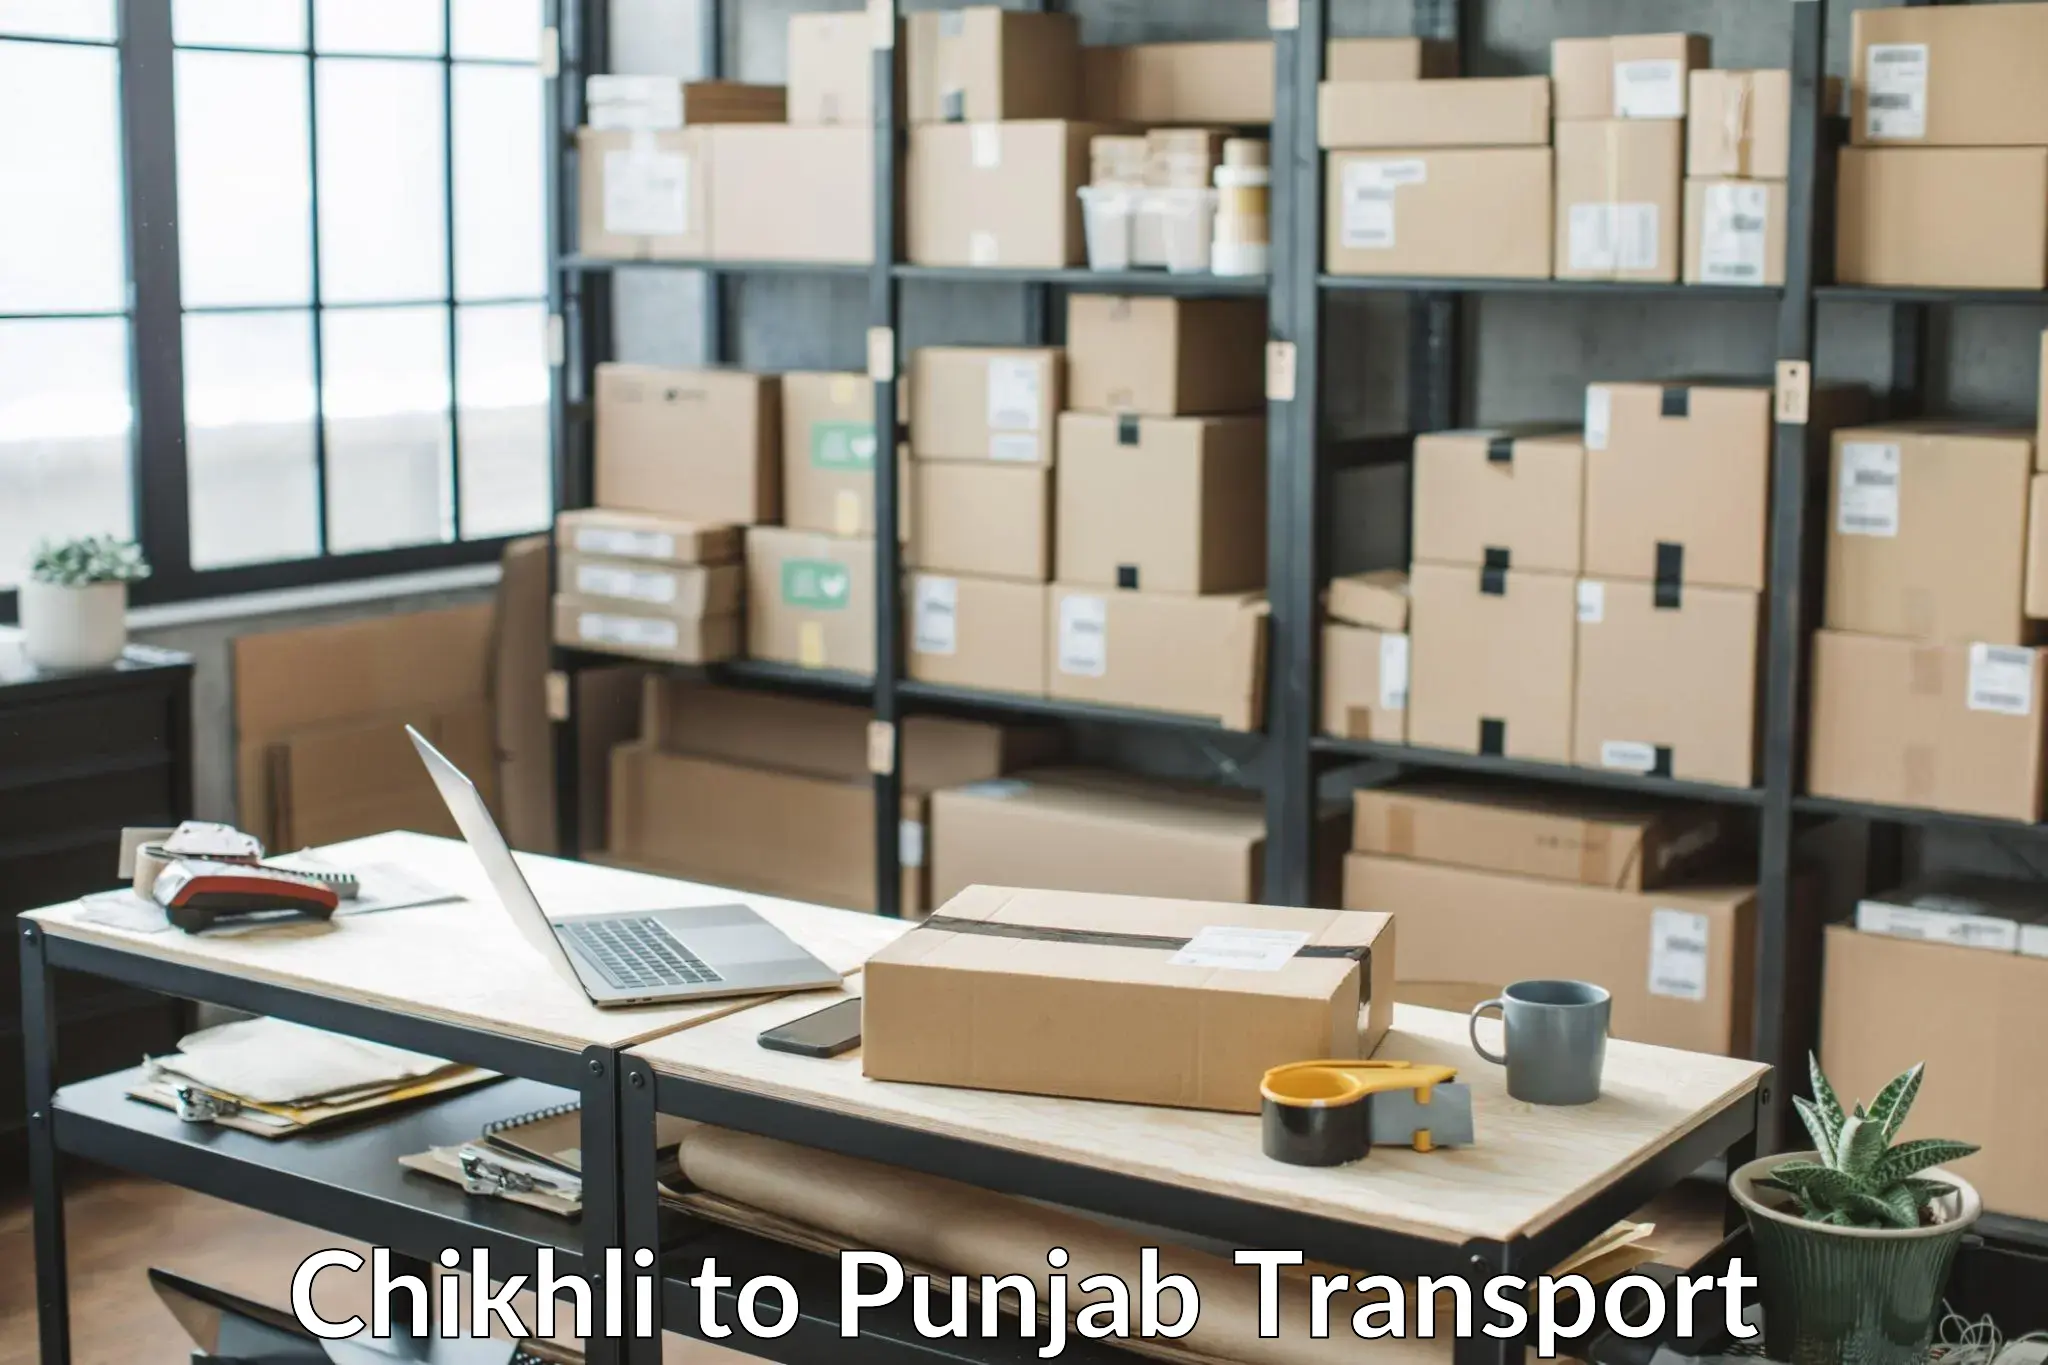 Online transport service Chikhli to Malout